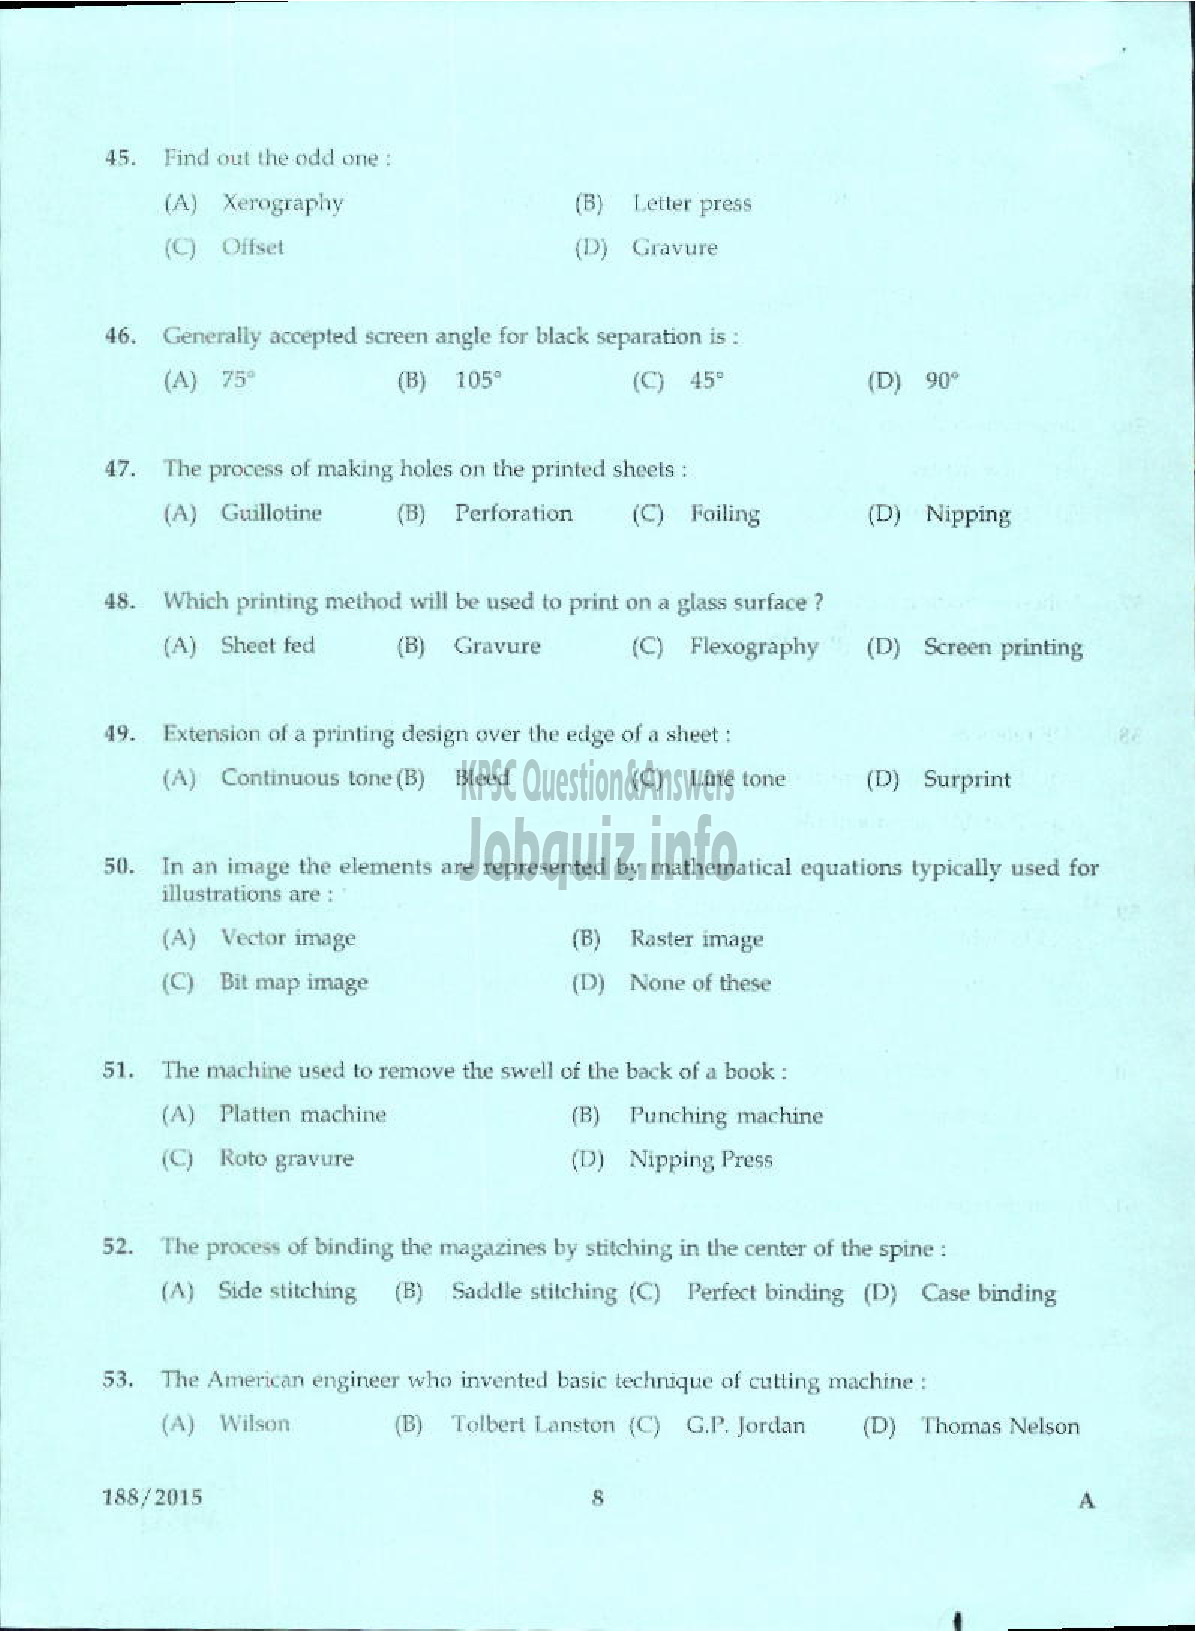 Kerala PSC Question Paper - LABORATORY TECHNICAL ASSISTANT PRINTING TECHNOLOGY VHSE-6